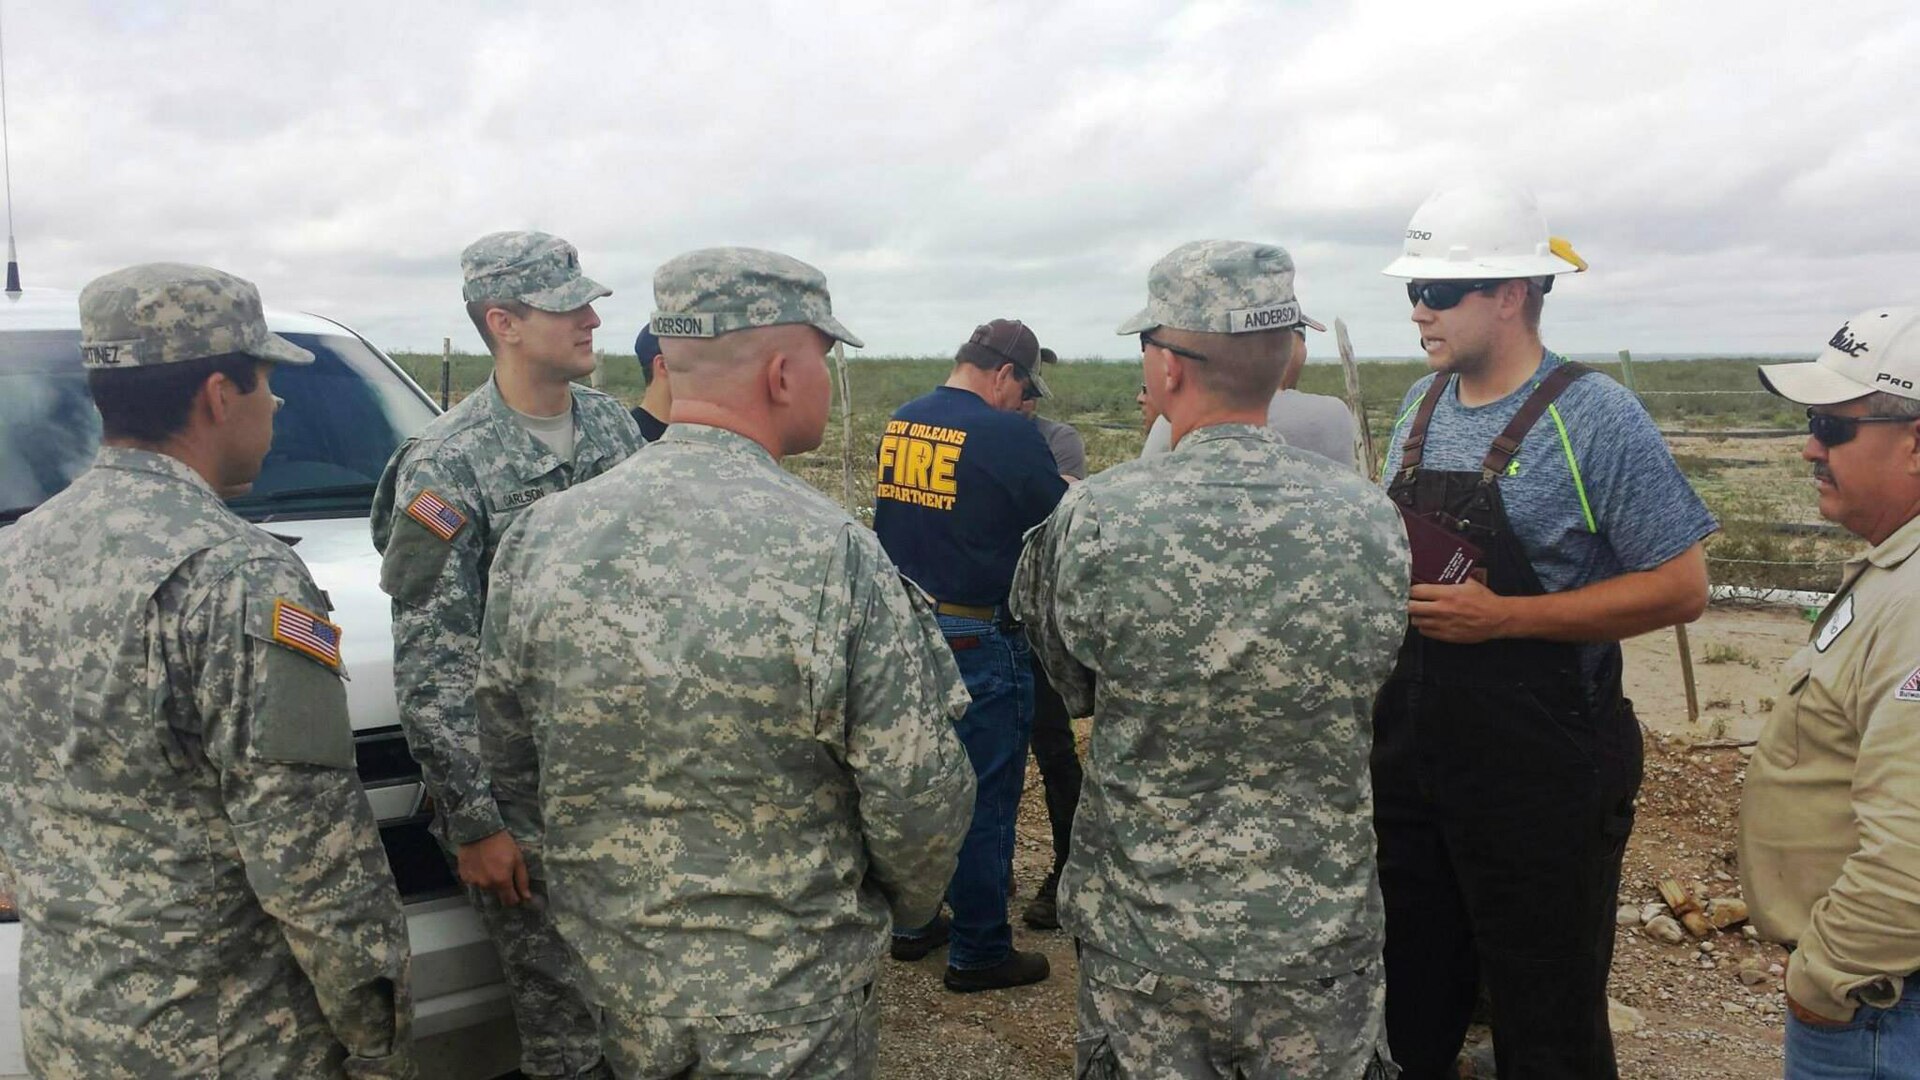 New Mexico National Guard Soldiers and civilian rescuers meet following the Guard's activation to assist following floods late last week.